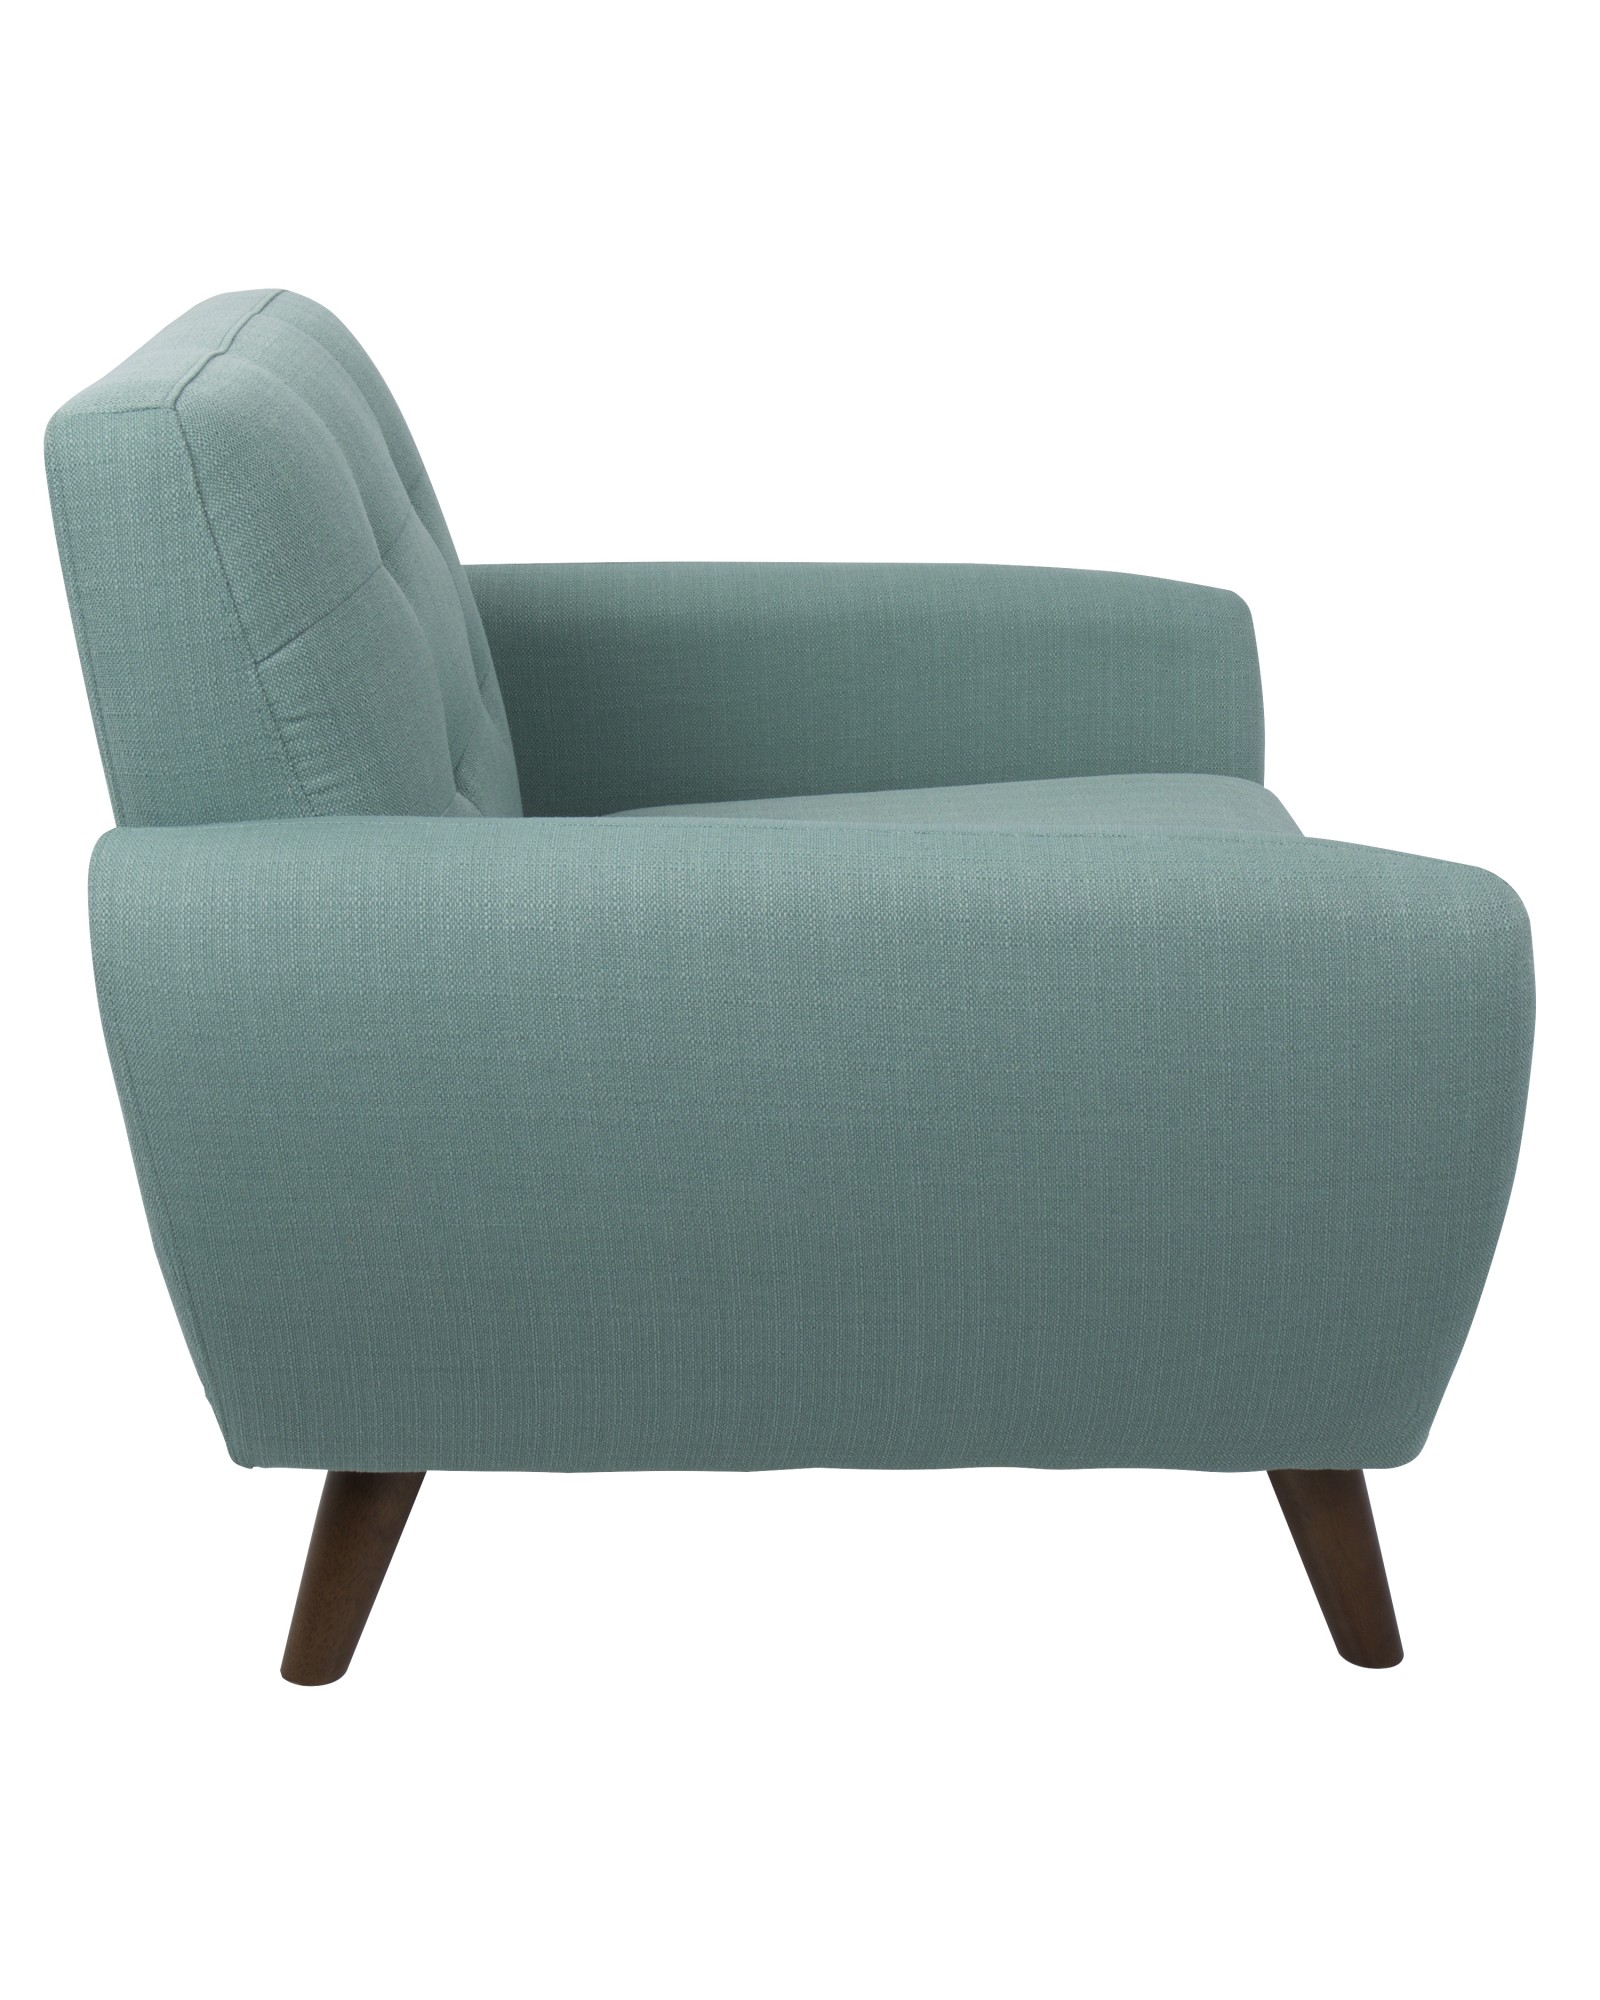 Hemingway Mid-Century Modern Accent Chair in Teal